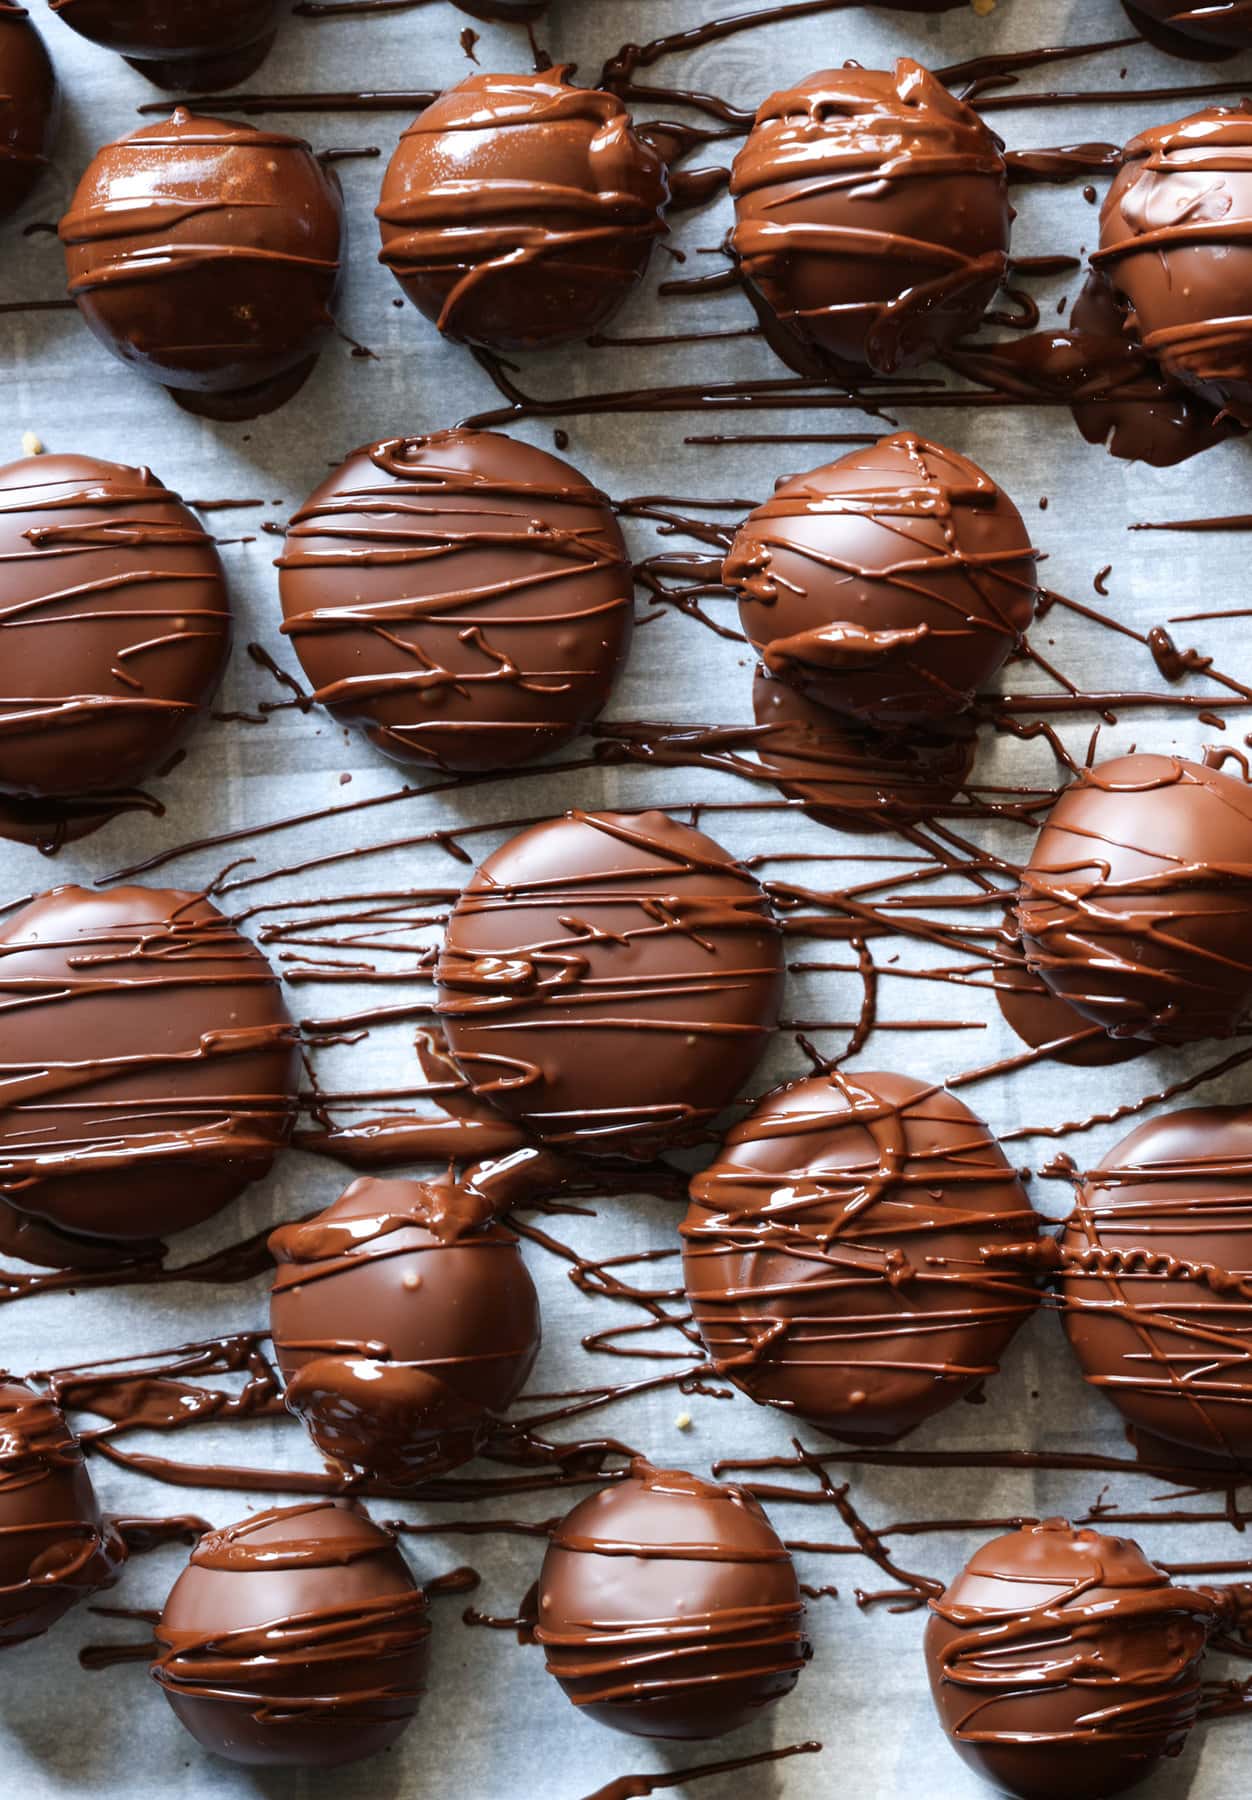 Wet melted chocolate decoratively drizzled onto peanut butter balls